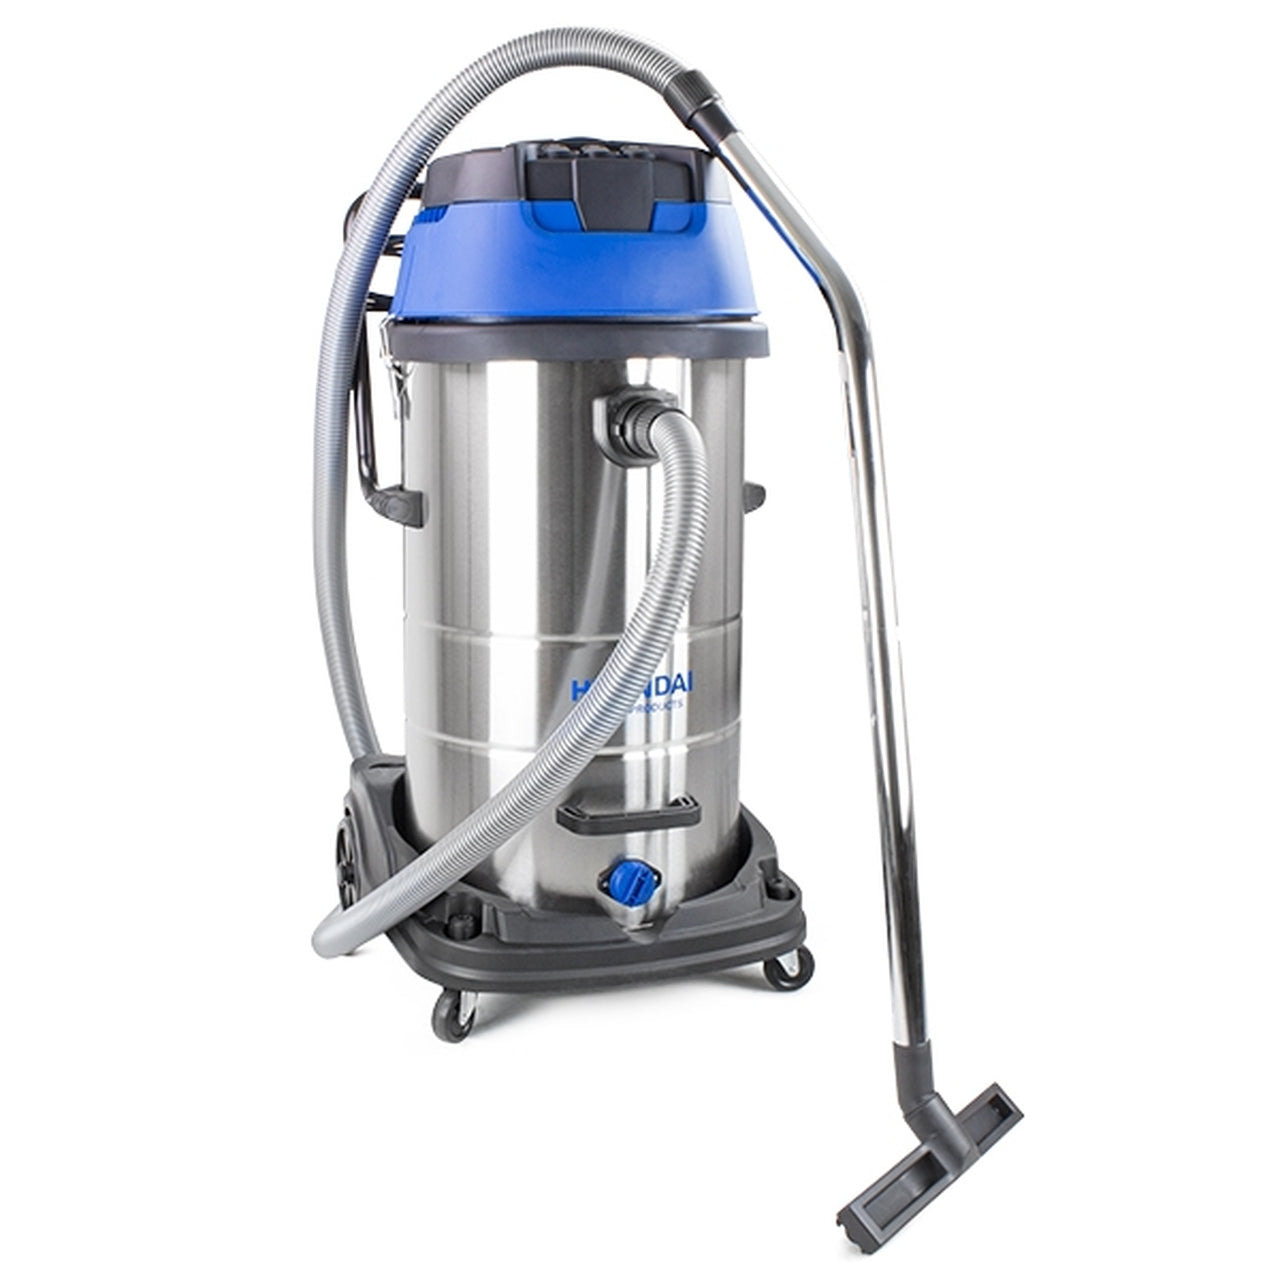 Hyundai-HYVI10030-3000W-Triple-Motor-3-In-1-Wet-and-Dry-Electric-HEPA-Filtration-Vacuum-Cleaner